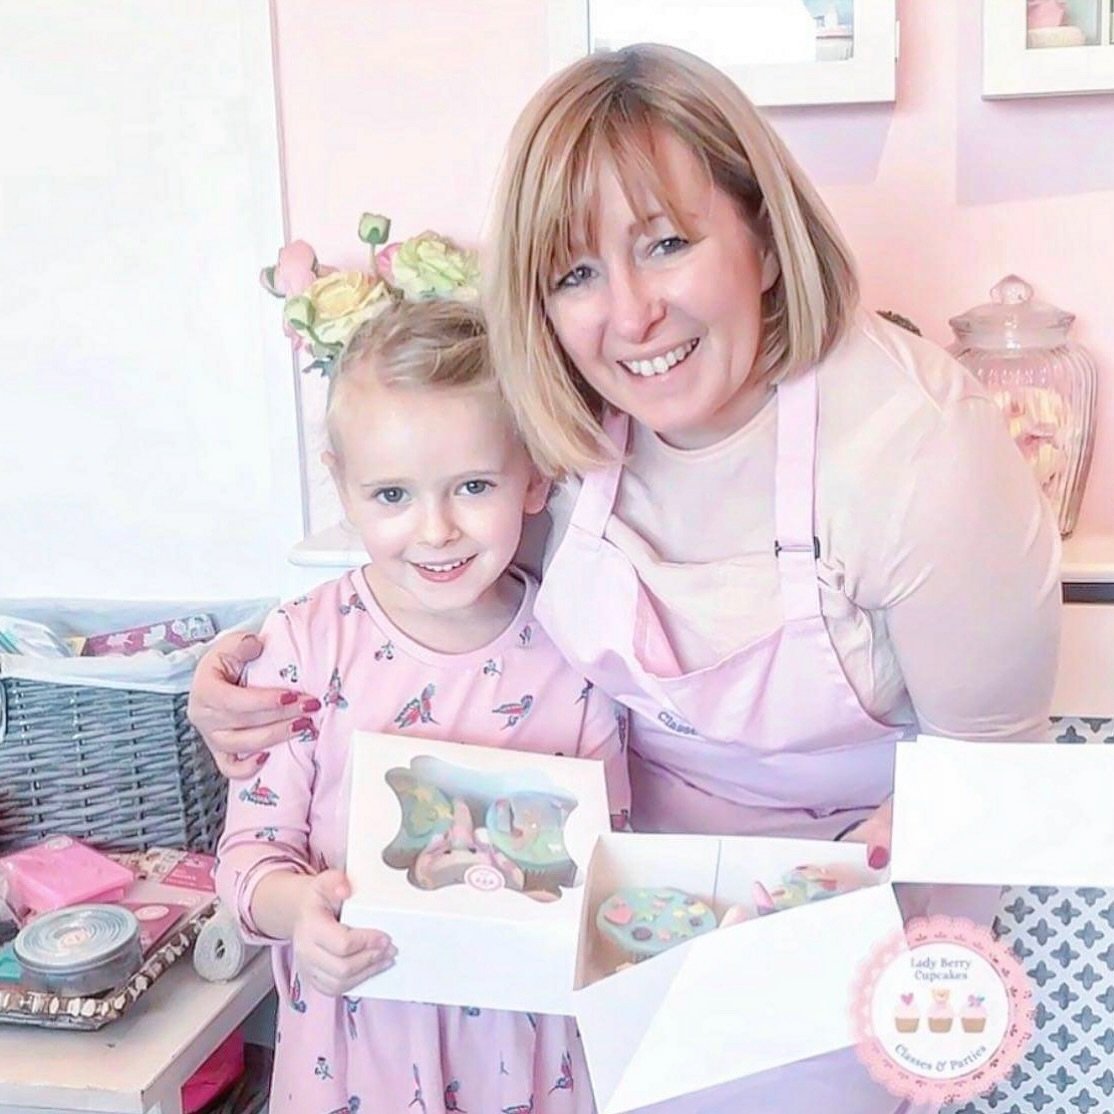 🩷 When you book your little ones some very special
1-1 time together!

🧁Such a wonderful way to make memories together!

⭐️Book at www.ladyberrycupcakes.co.uk

#CupcakeParty #CupcakeDecorating #CupcakeClass, #CupcakeClasses, #CakeDecoratingClasses 